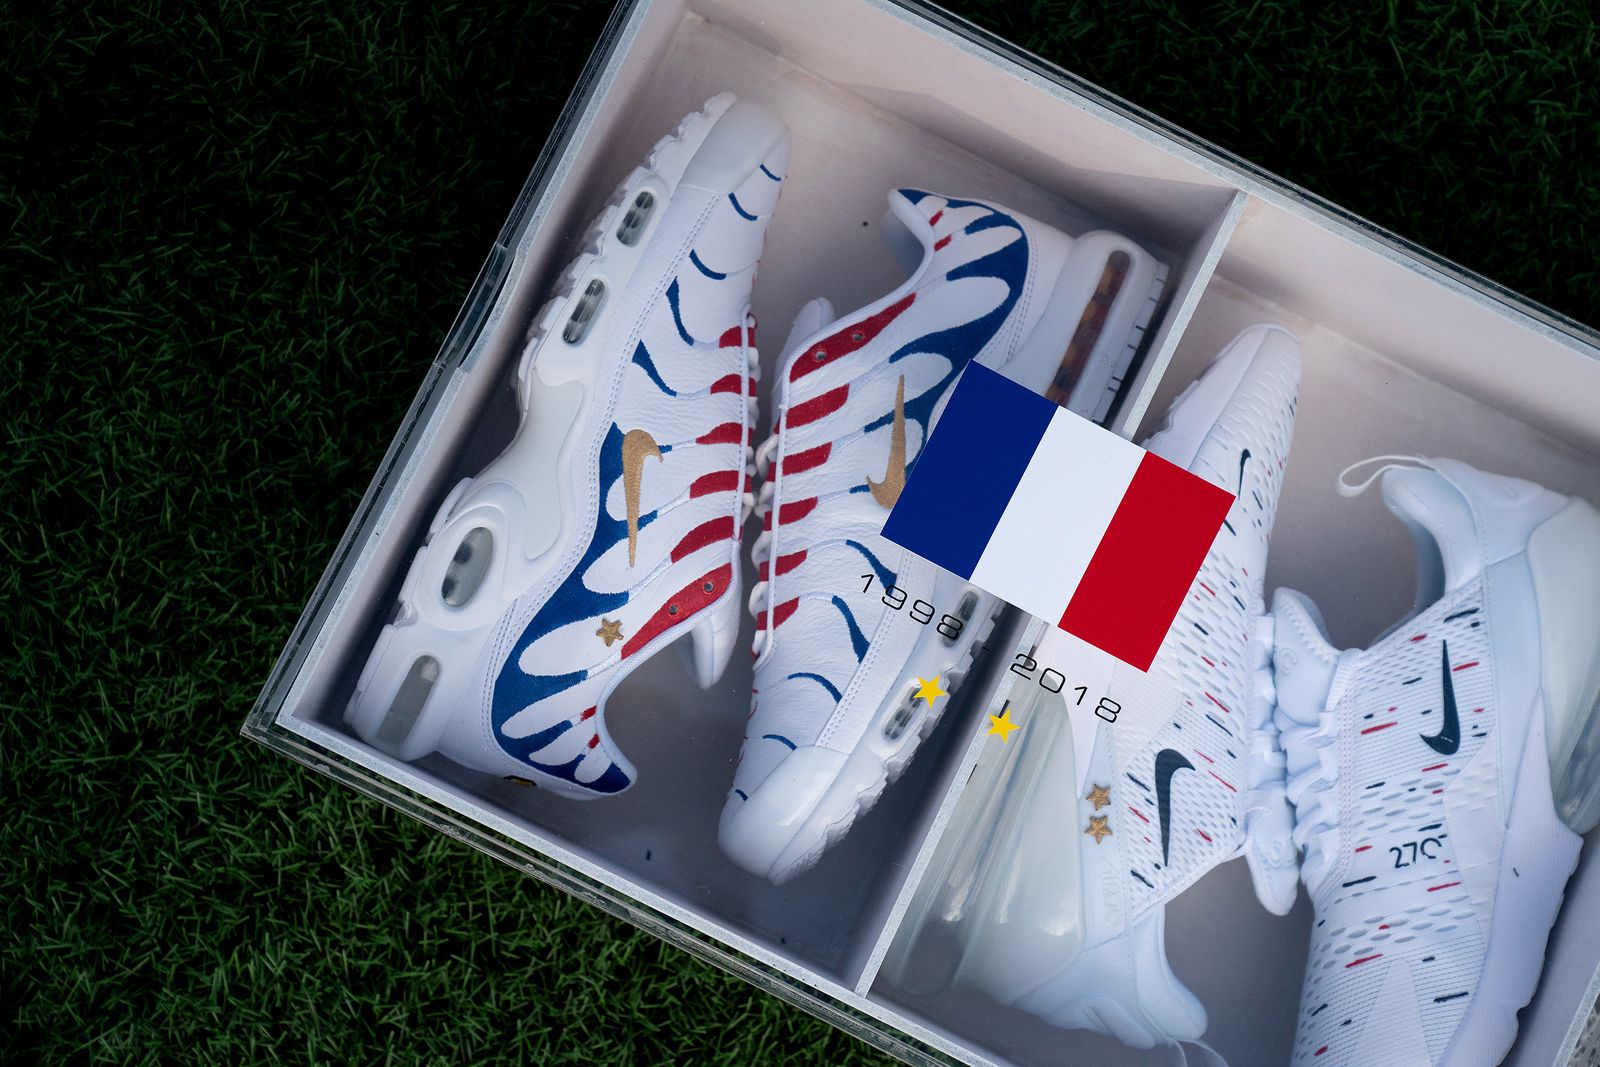 Nike Air Pack Celebrates France's World Titles and Kylian Mbappé - Footy Headlines